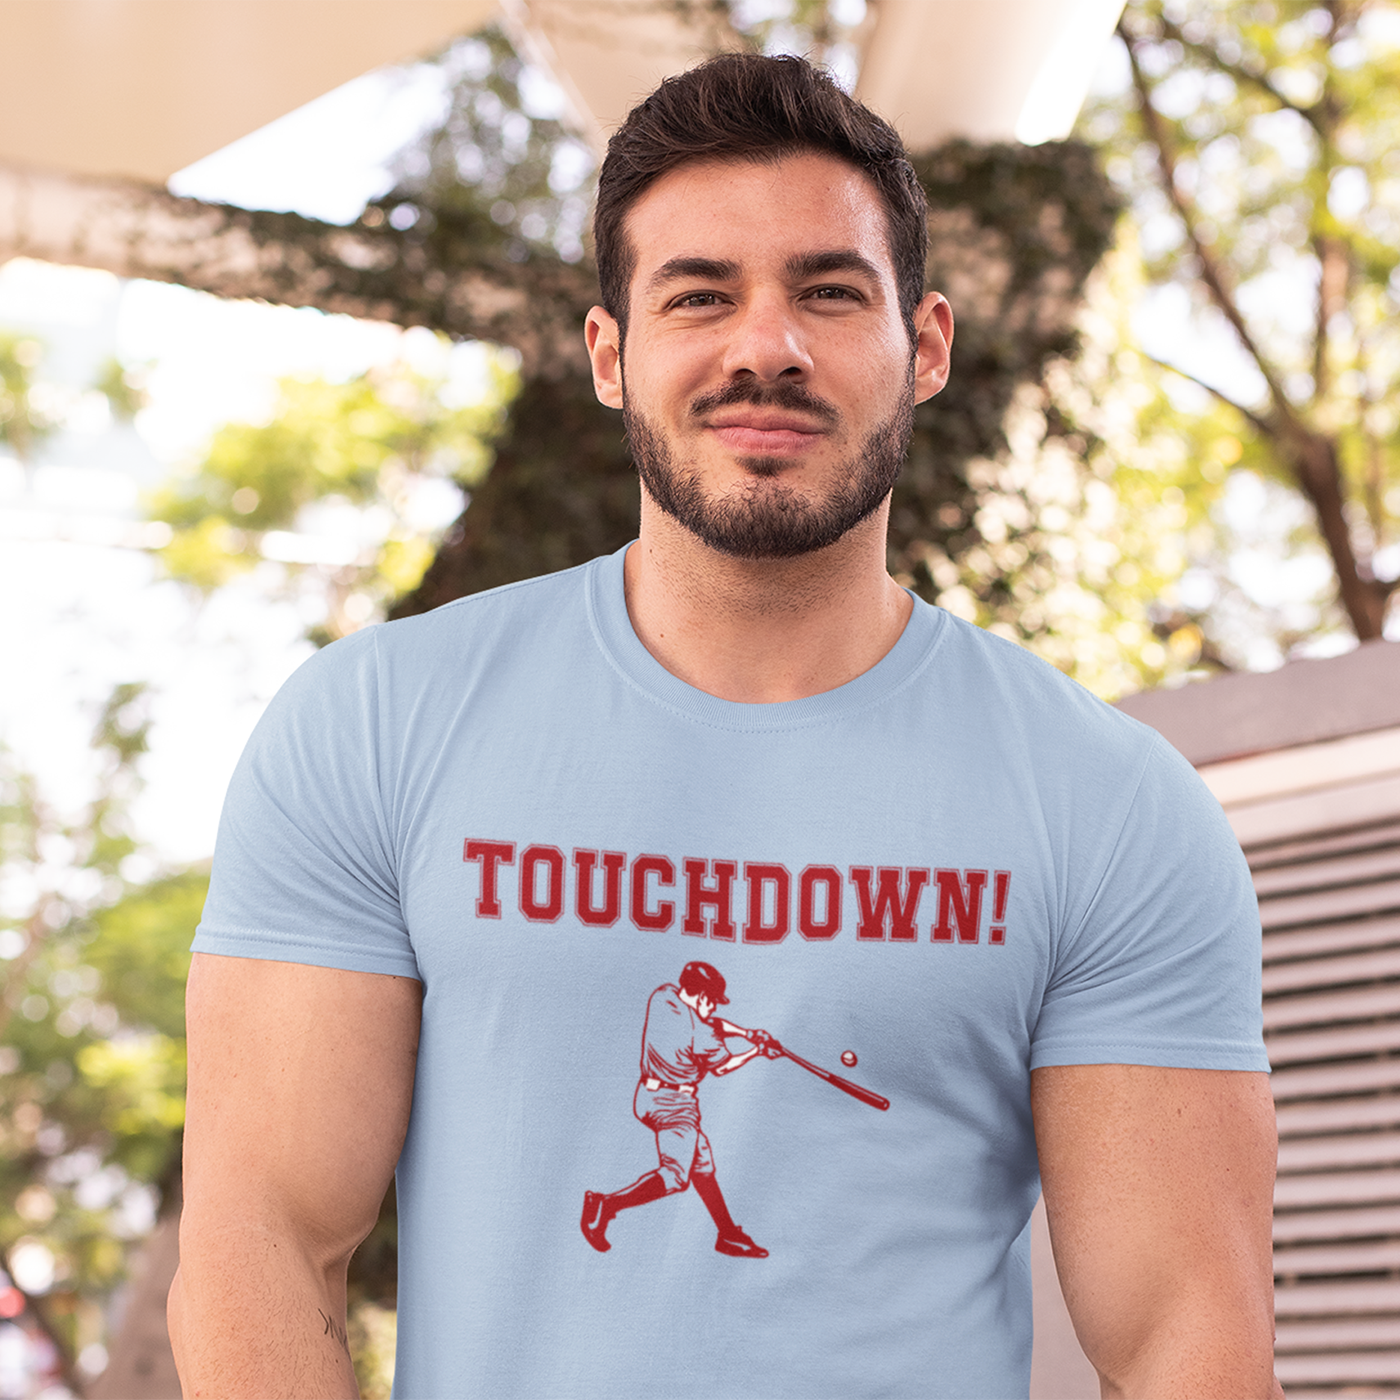 //cdn.shopify.com/s/files/1/0274/2488/2766/files/t-shirt-mockup-of-a-muscled-man-smirking-at-the-camera-28517_5000x.png?v=1614348229 5000w,
    //cdn.shopify.com/s/files/1/0274/2488/2766/files/t-shirt-mockup-of-a-muscled-man-smirking-at-the-camera-28517_4500x.png?v=1614348229 4500w,
    //cdn.shopify.com/s/files/1/0274/2488/2766/files/t-shirt-mockup-of-a-muscled-man-smirking-at-the-camera-28517_4000x.png?v=1614348229 4000w,
    //cdn.shopify.com/s/files/1/0274/2488/2766/files/t-shirt-mockup-of-a-muscled-man-smirking-at-the-camera-28517_3500x.png?v=1614348229 3500w,
    //cdn.shopify.com/s/files/1/0274/2488/2766/files/t-shirt-mockup-of-a-muscled-man-smirking-at-the-camera-28517_3000x.png?v=1614348229 3000w,
    //cdn.shopify.com/s/files/1/0274/2488/2766/files/t-shirt-mockup-of-a-muscled-man-smirking-at-the-camera-28517_2500x.png?v=1614348229 2500w,
    //cdn.shopify.com/s/files/1/0274/2488/2766/files/t-shirt-mockup-of-a-muscled-man-smirking-at-the-camera-28517_2000x.png?v=1614348229 2000w,
    //cdn.shopify.com/s/files/1/0274/2488/2766/files/t-shirt-mockup-of-a-muscled-man-smirking-at-the-camera-28517_1800x.png?v=1614348229 1800w,
    //cdn.shopify.com/s/files/1/0274/2488/2766/files/t-shirt-mockup-of-a-muscled-man-smirking-at-the-camera-28517_1600x.png?v=1614348229 1600w,
    //cdn.shopify.com/s/files/1/0274/2488/2766/files/t-shirt-mockup-of-a-muscled-man-smirking-at-the-camera-28517_1400x.png?v=1614348229 1400w,
    //cdn.shopify.com/s/files/1/0274/2488/2766/files/t-shirt-mockup-of-a-muscled-man-smirking-at-the-camera-28517_1200x.png?v=1614348229 1200w,
    //cdn.shopify.com/s/files/1/0274/2488/2766/files/t-shirt-mockup-of-a-muscled-man-smirking-at-the-camera-28517_1000x.png?v=1614348229 1000w,
    //cdn.shopify.com/s/files/1/0274/2488/2766/files/t-shirt-mockup-of-a-muscled-man-smirking-at-the-camera-28517_800x.png?v=1614348229 800w,
    //cdn.shopify.com/s/files/1/0274/2488/2766/files/t-shirt-mockup-of-a-muscled-man-smirking-at-the-camera-28517_600x.png?v=1614348229 600w,
    //cdn.shopify.com/s/files/1/0274/2488/2766/files/t-shirt-mockup-of-a-muscled-man-smirking-at-the-camera-28517_400x.png?v=1614348229 400w,
    //cdn.shopify.com/s/files/1/0274/2488/2766/files/t-shirt-mockup-of-a-muscled-man-smirking-at-the-camera-28517_200x.png?v=1614348229 200w